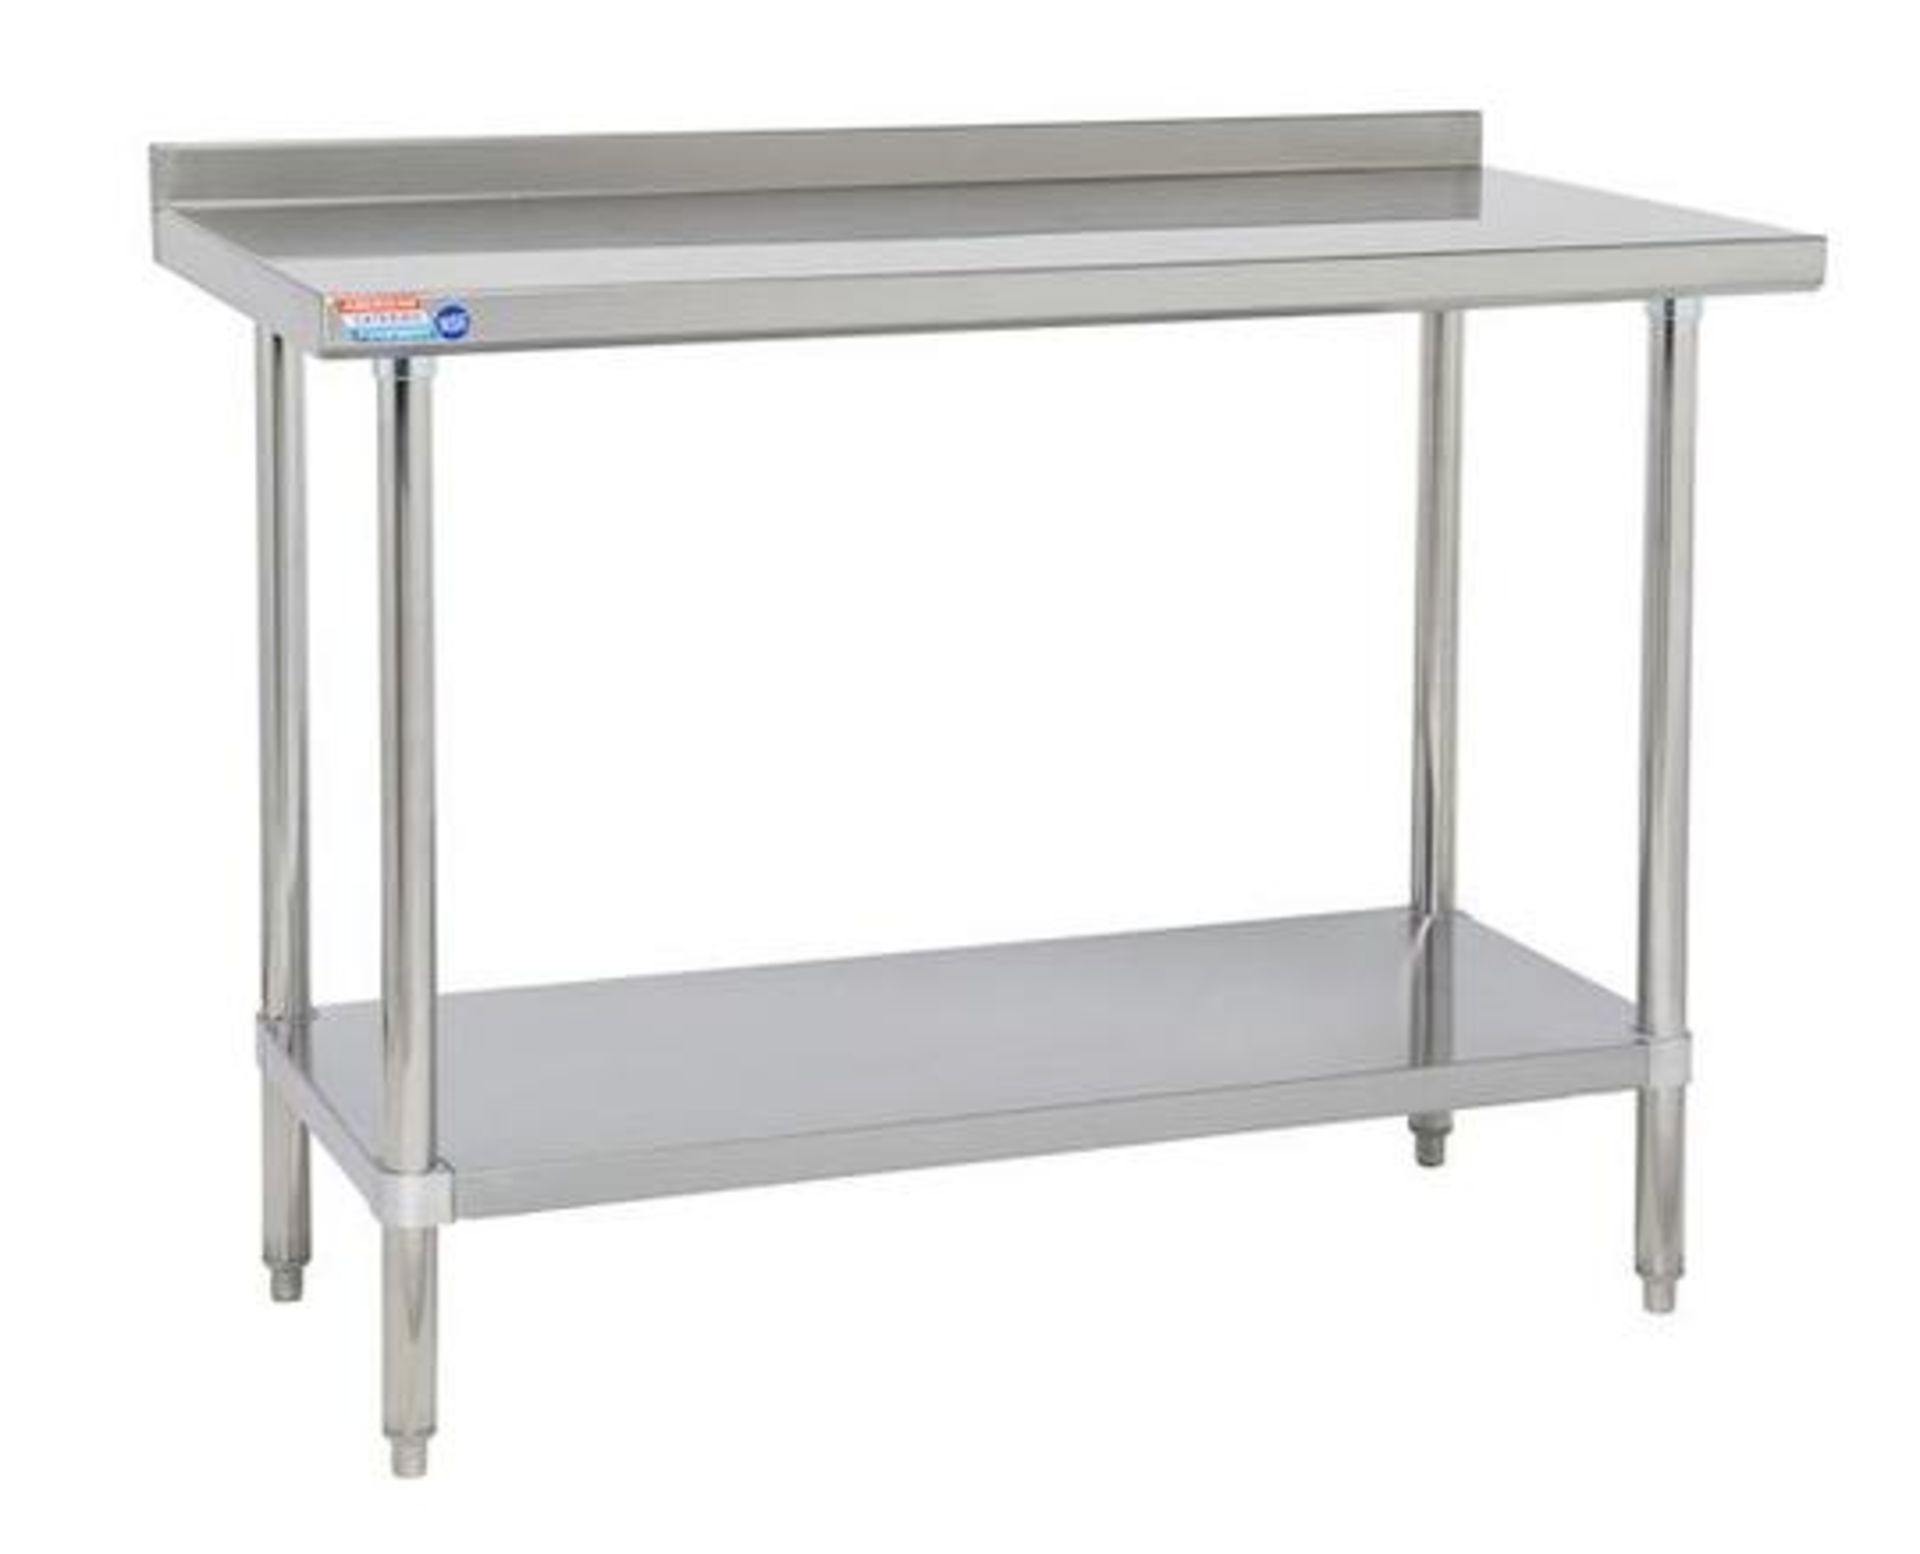 Stainless steel wall table heavy duty 1219 x 762 mm